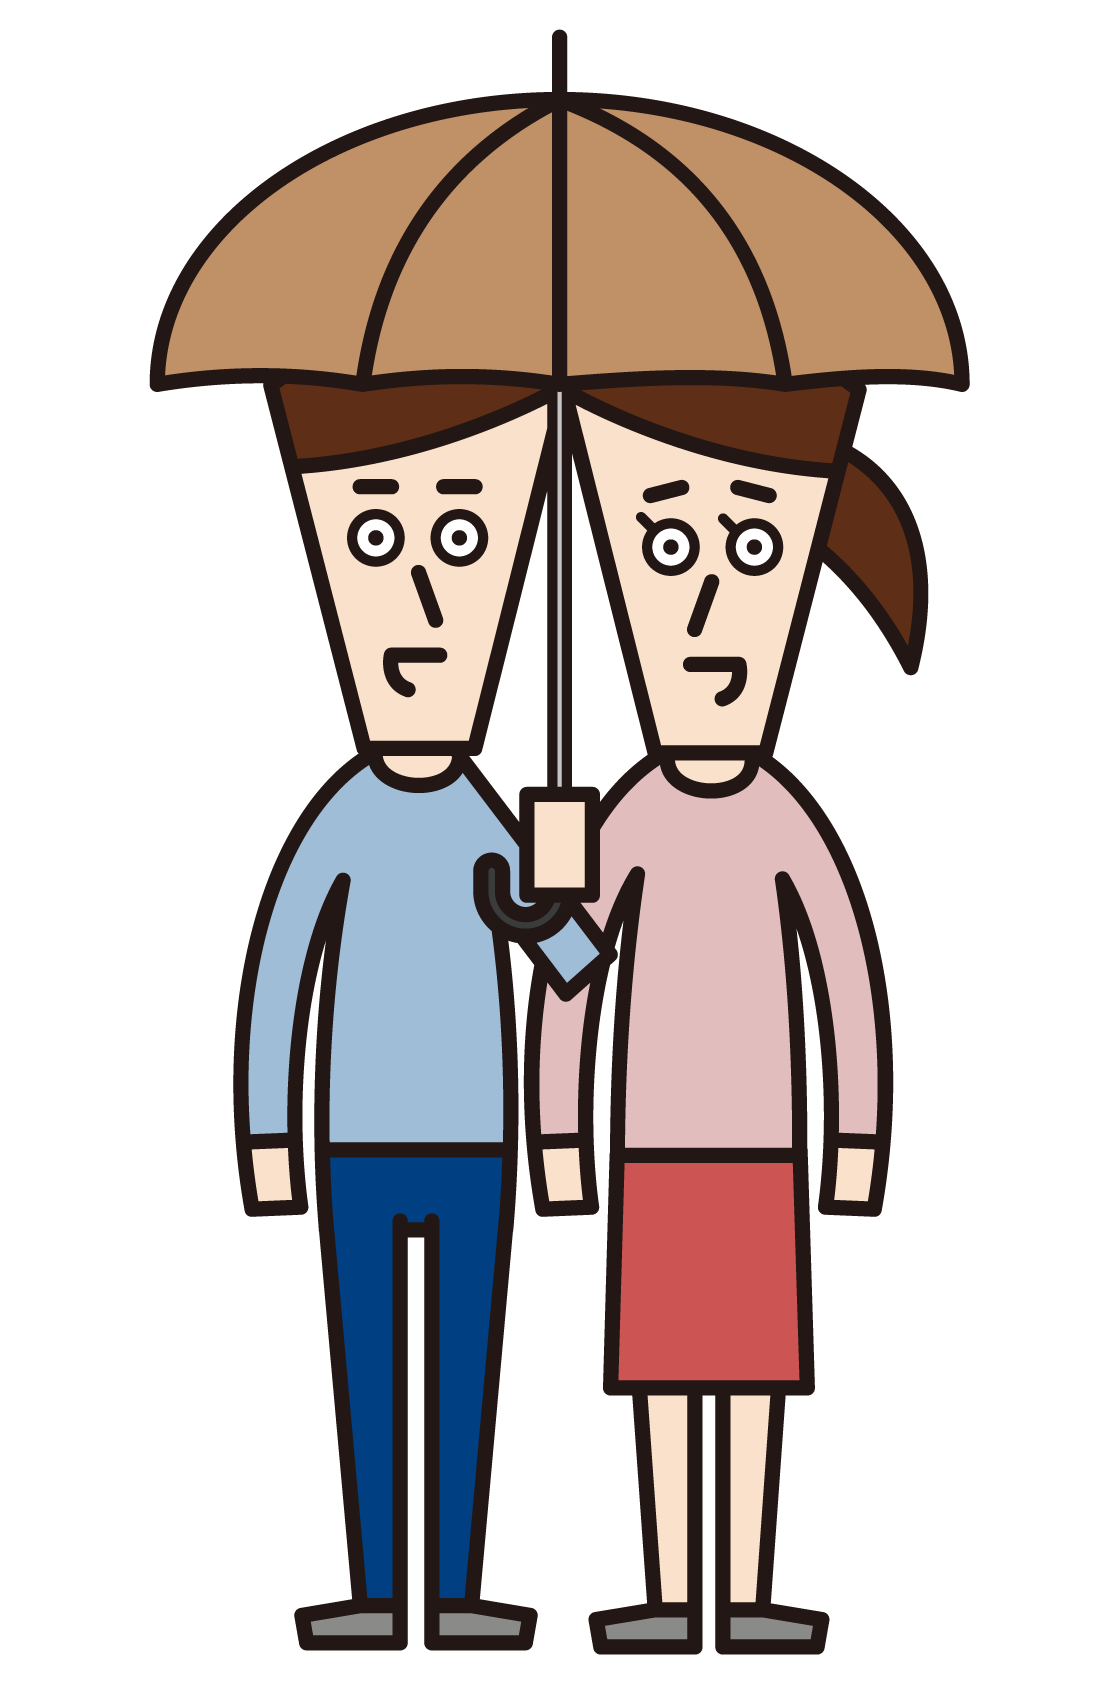 Illustration of a couple of high school and junior high school students holding an umbrella